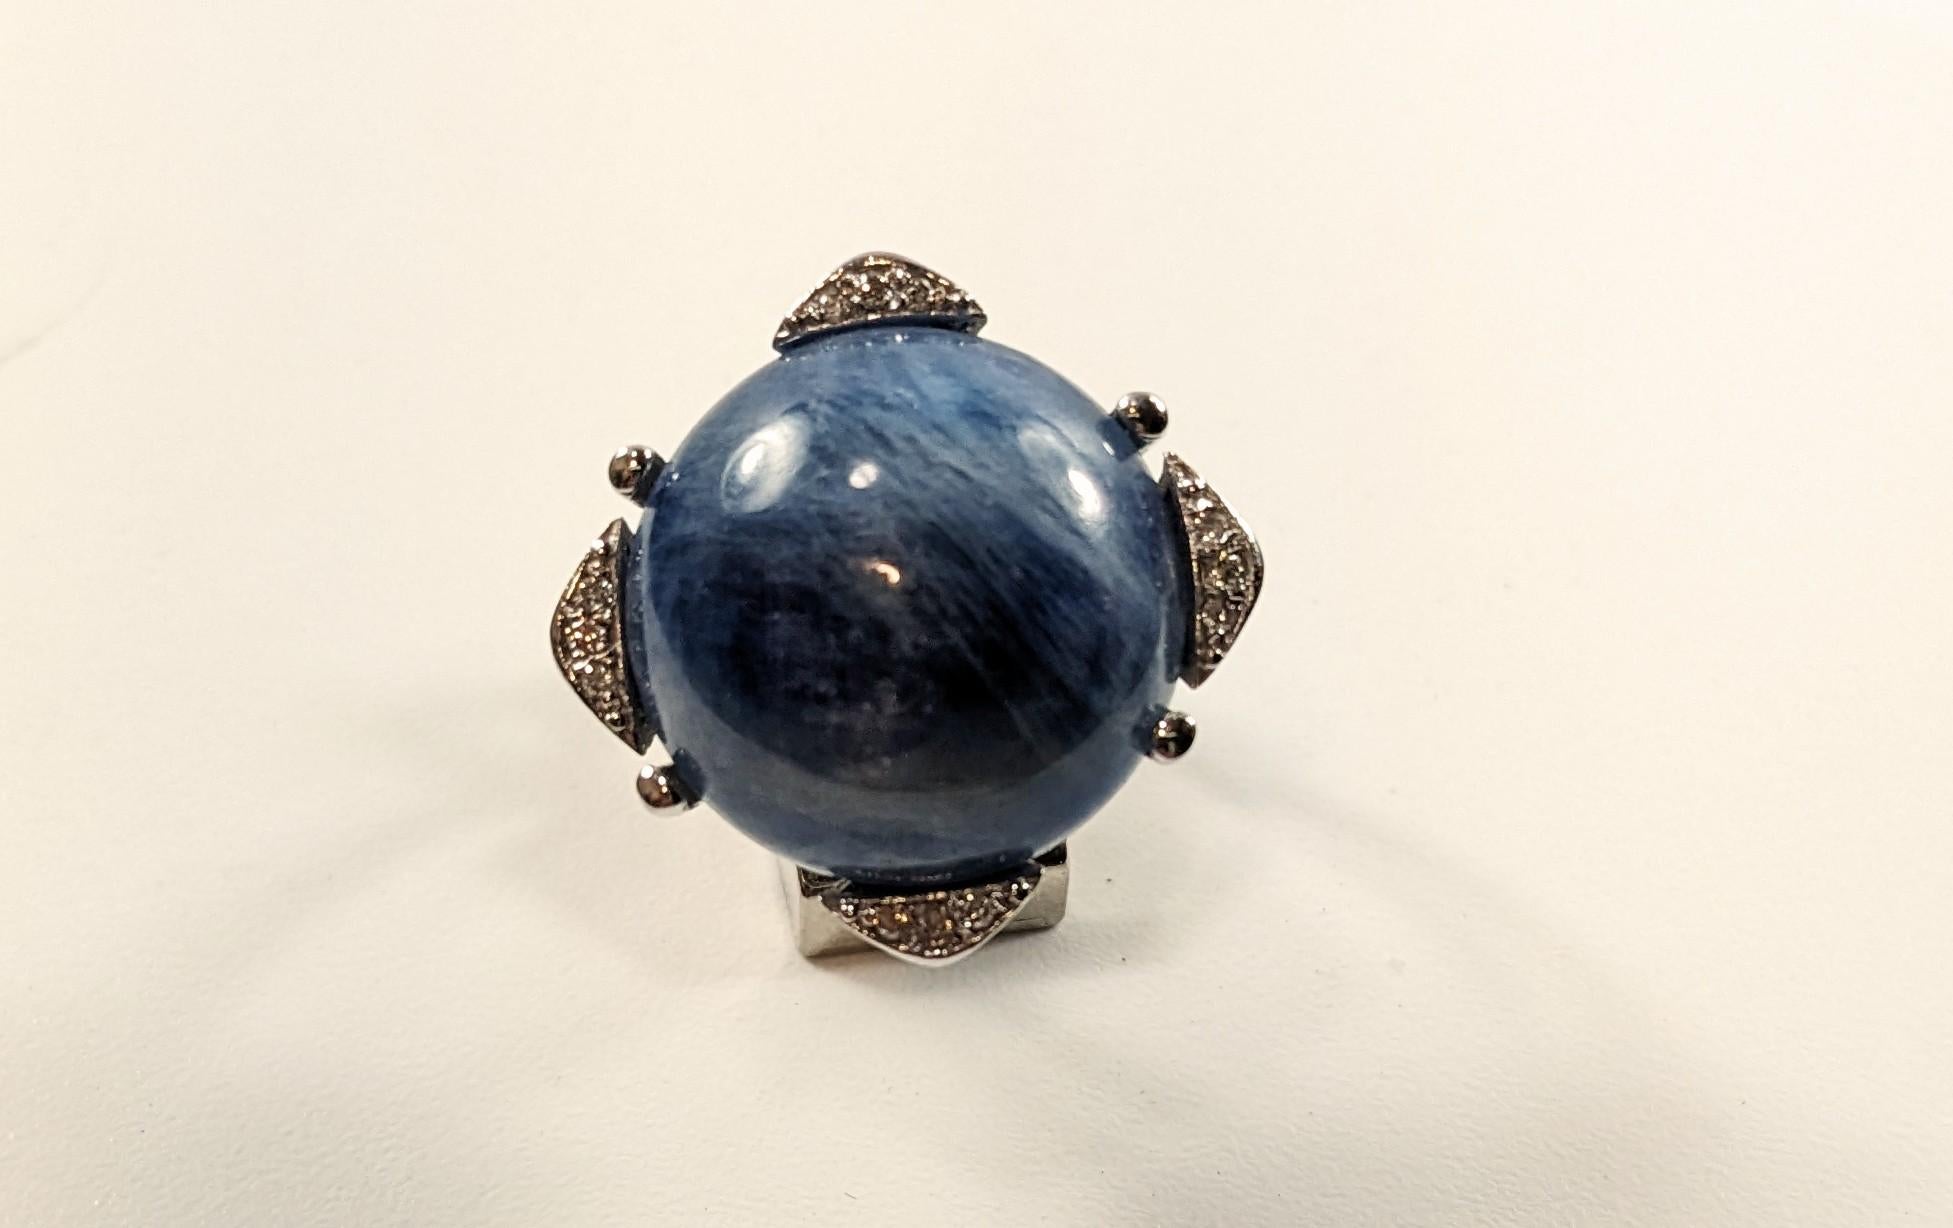 Ring 18k White Gold with Central Kyanite
White gold ring with large round kyanite star cabochon in claws bordered by four white pavede details with brilliant cut diamonds
A kyanite  17ct
12 btes  0,12 ct aprox
Ring number 17
Weight 7 gr.

IRAMA